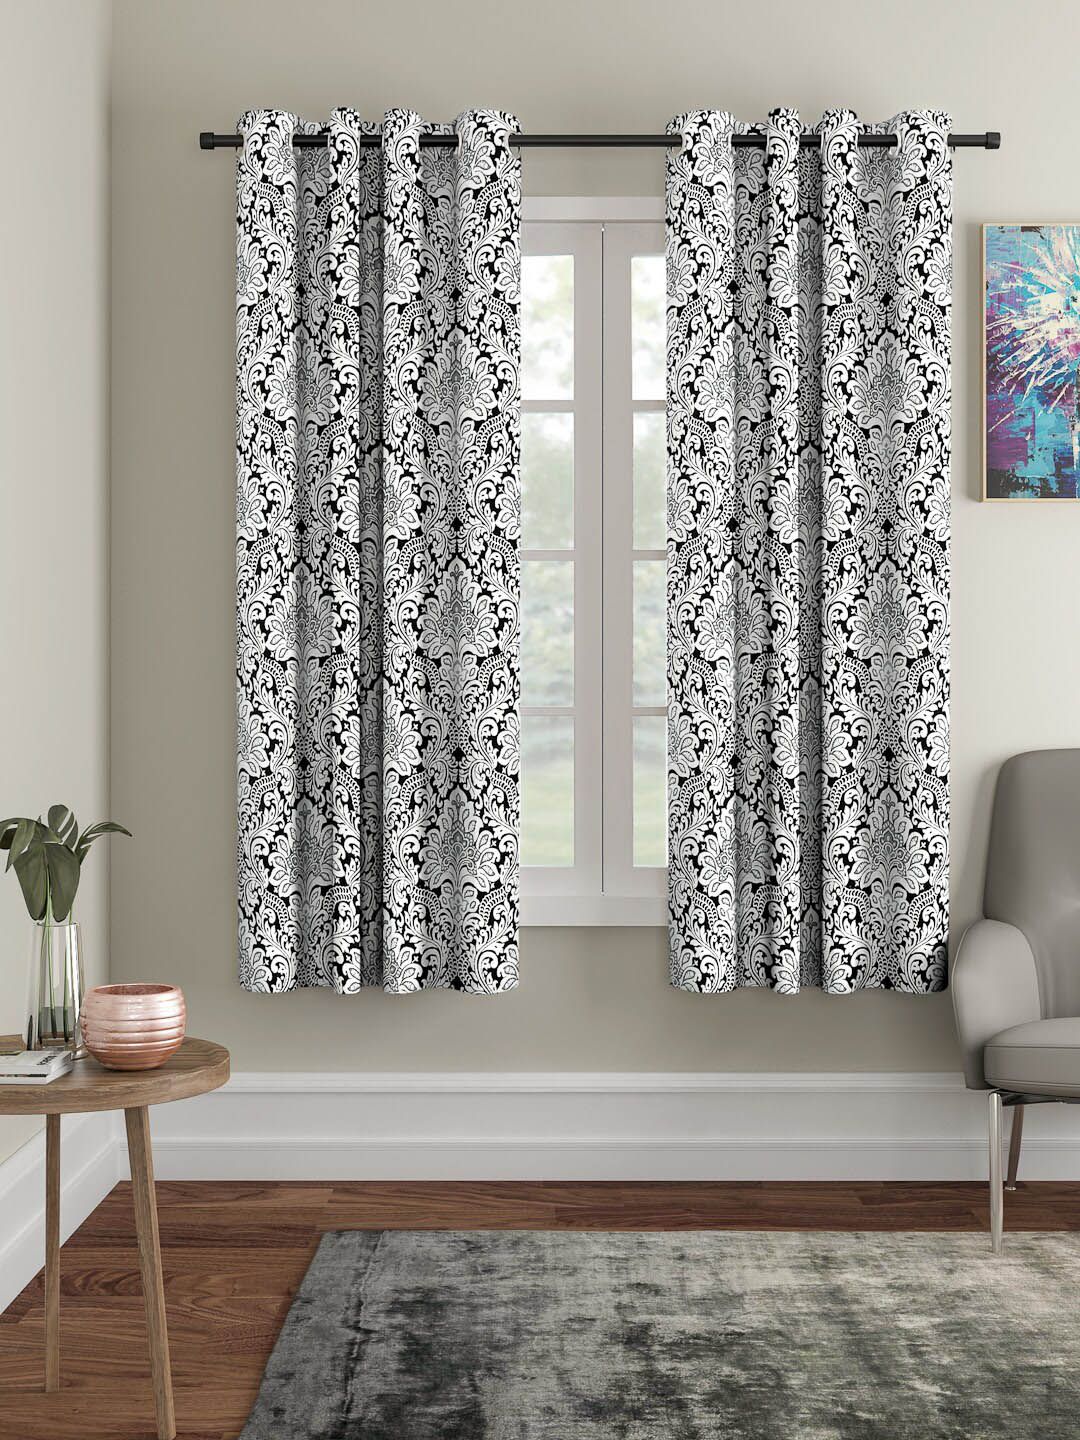 Rajasthan Decor Black & White Set of 2 Curtains Price in India